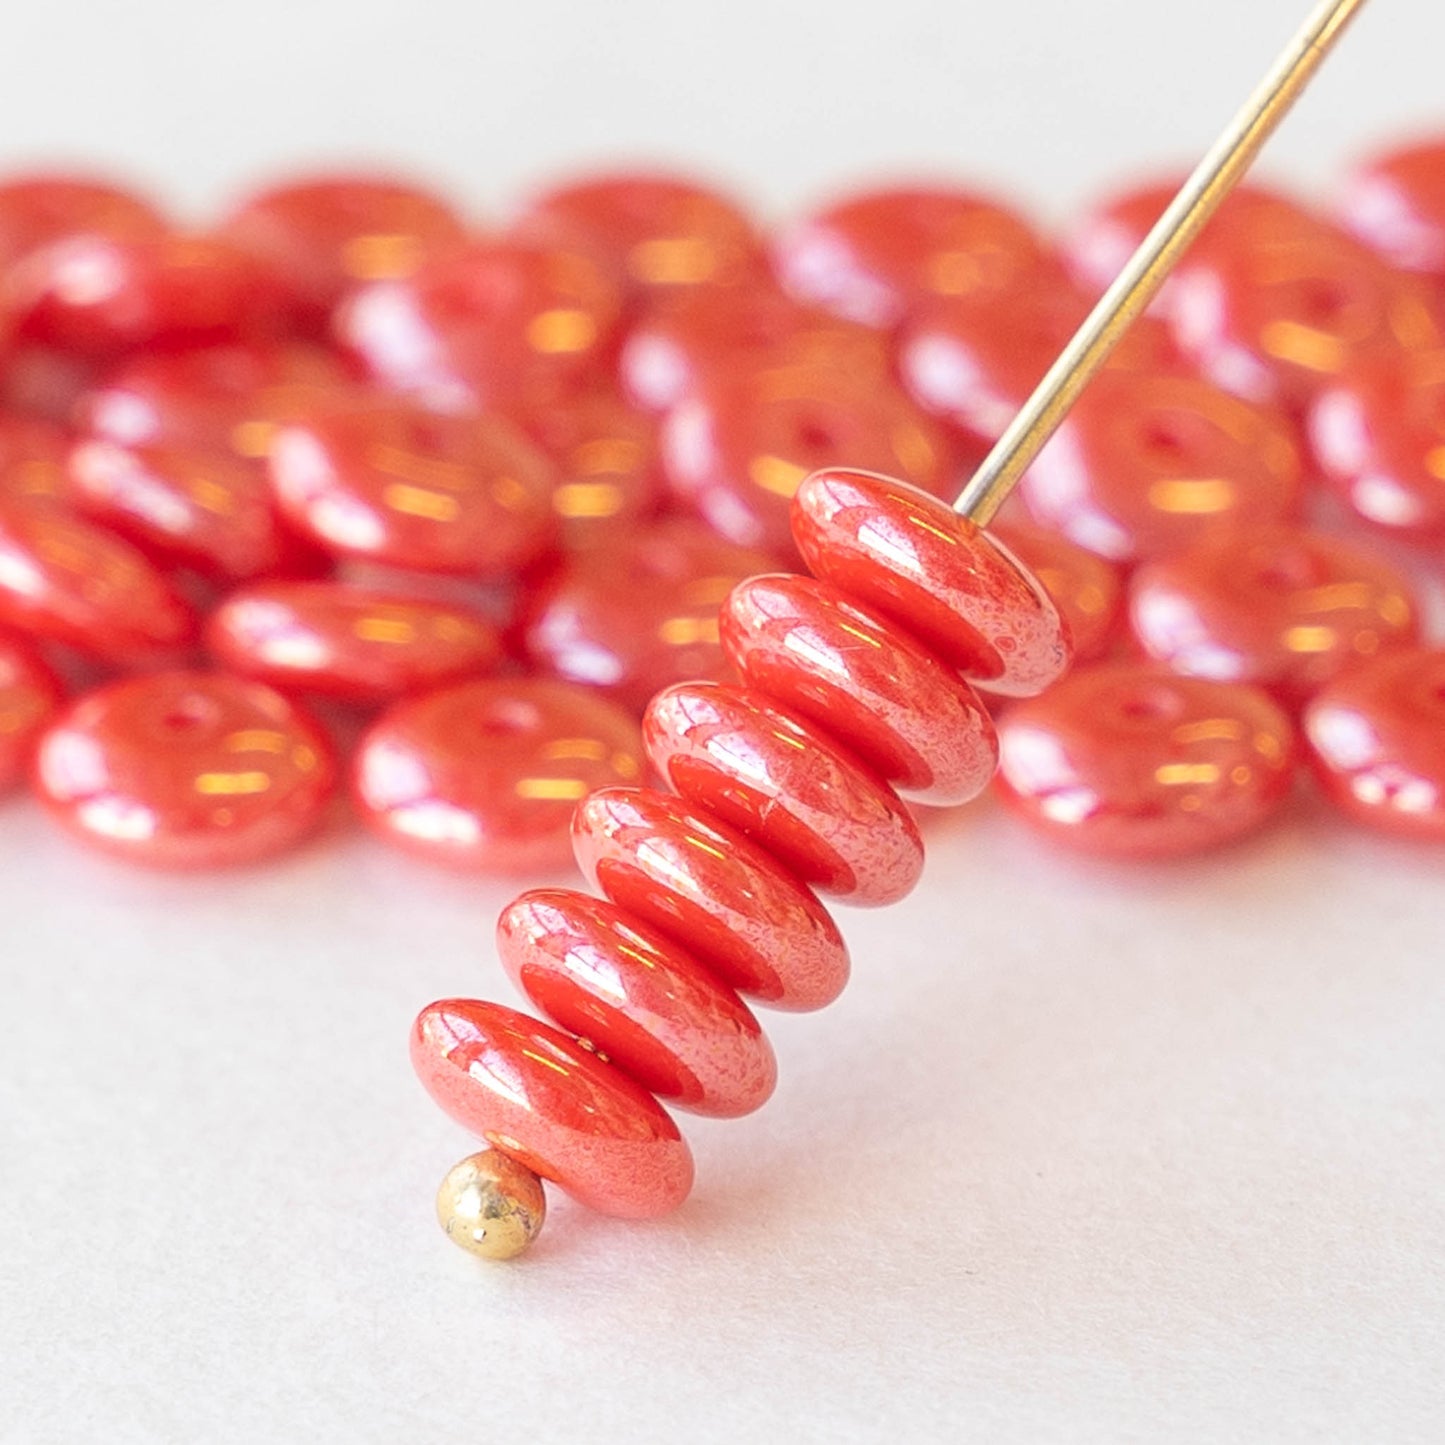 Red Round Glass Beads, Sizes 8mm, 6mm and 4mm. Not Painted or Coated, Goes  Well with Cat's Eye Beads. Craft, Jewelry and DIY Projects. (8mm - 50